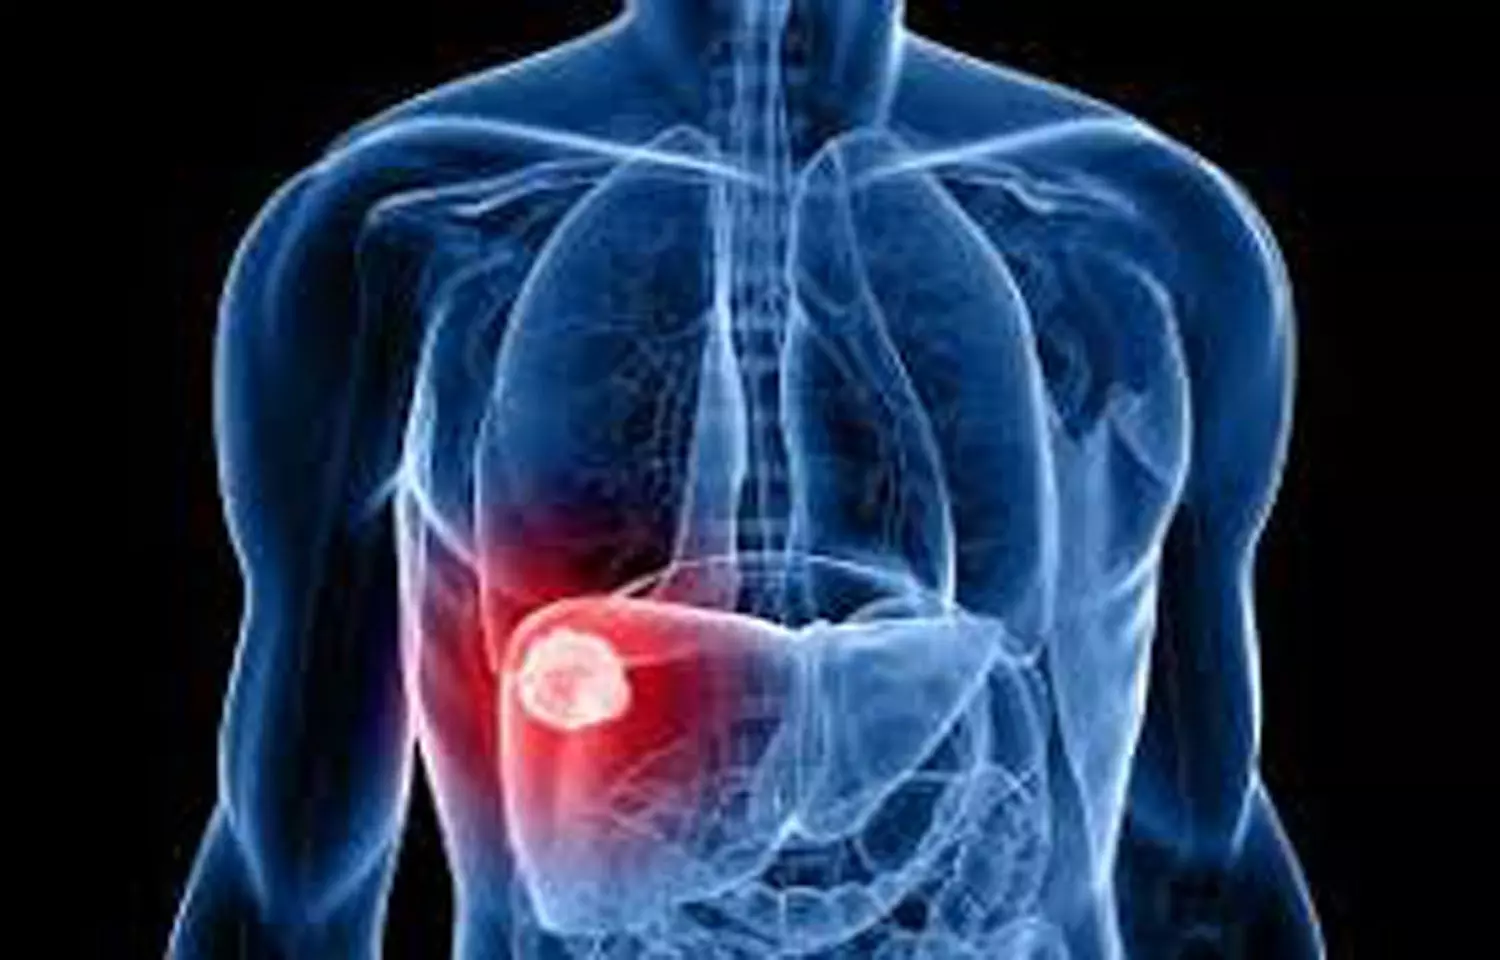 Shorter intervals of ultrasound screening helps in early detection of liver cancer: JAMA